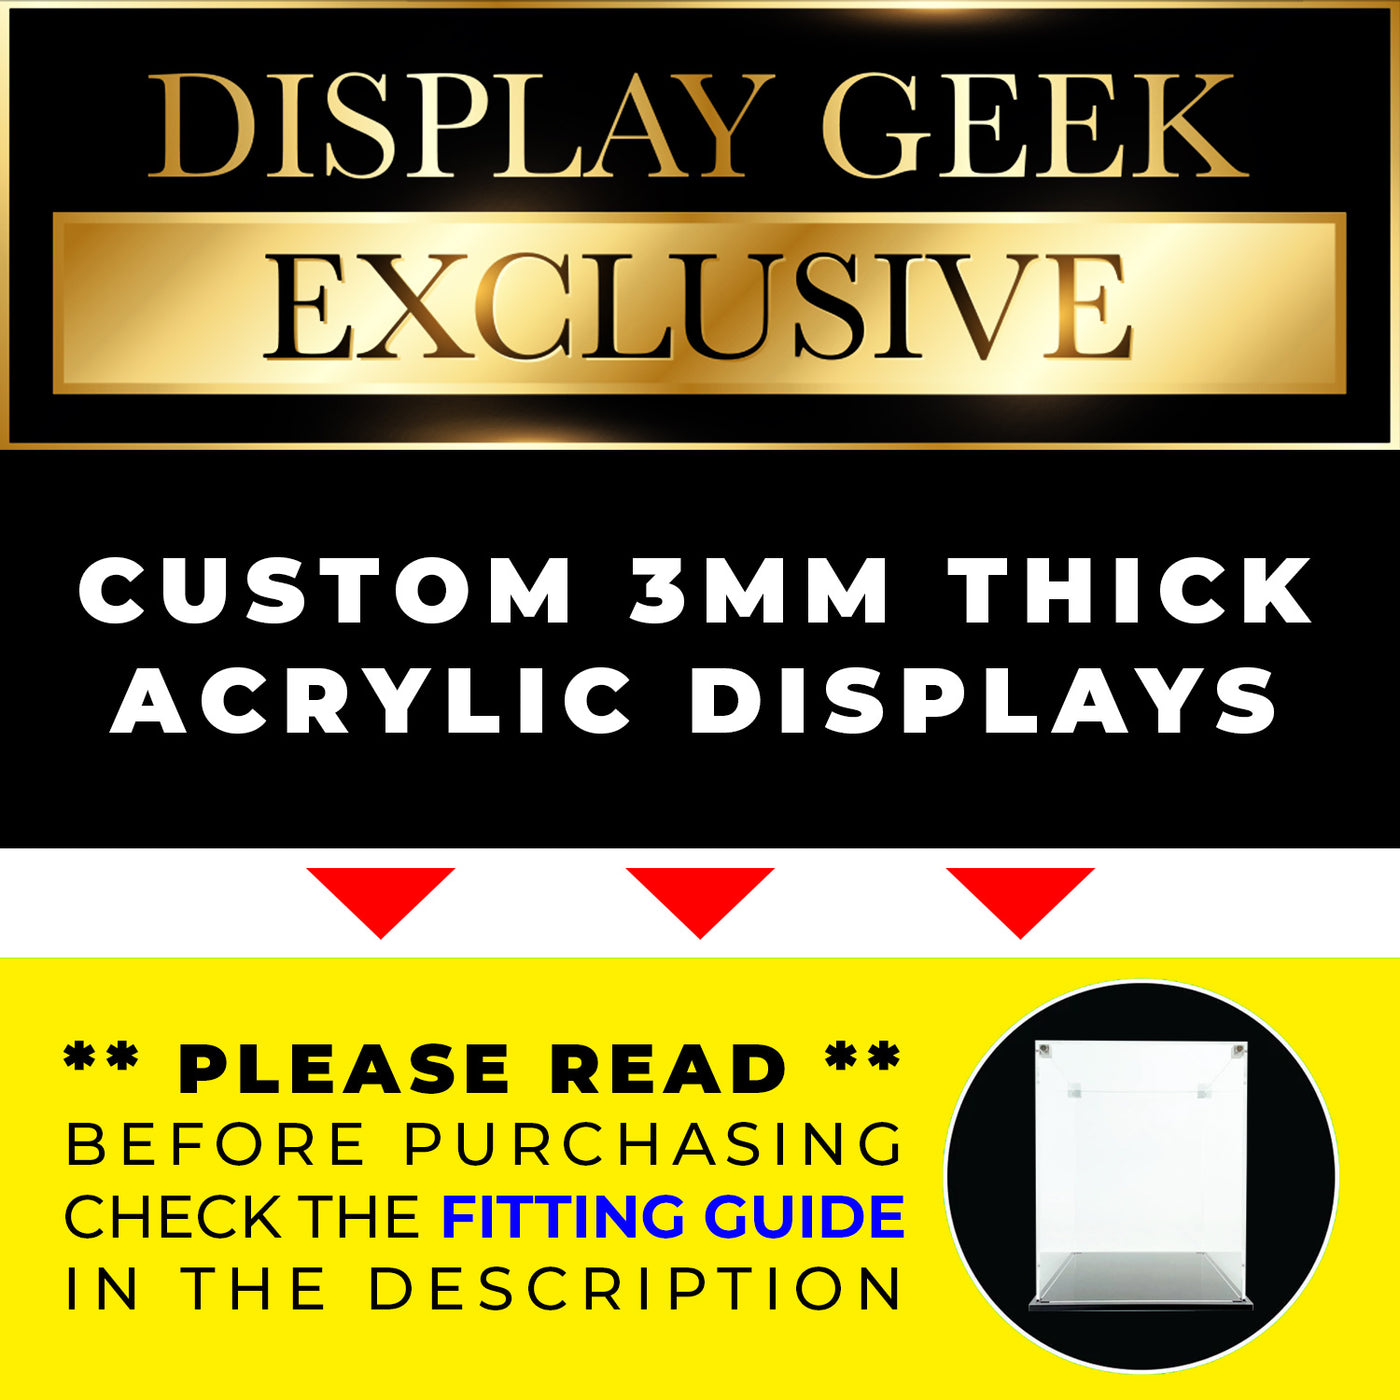 6.25h x 13.5w x 3.5d Funko 3 Pops Side by Side Custom Acrylic Display Case for Funko Pop Grails on The Protector Guide App by Display Geek